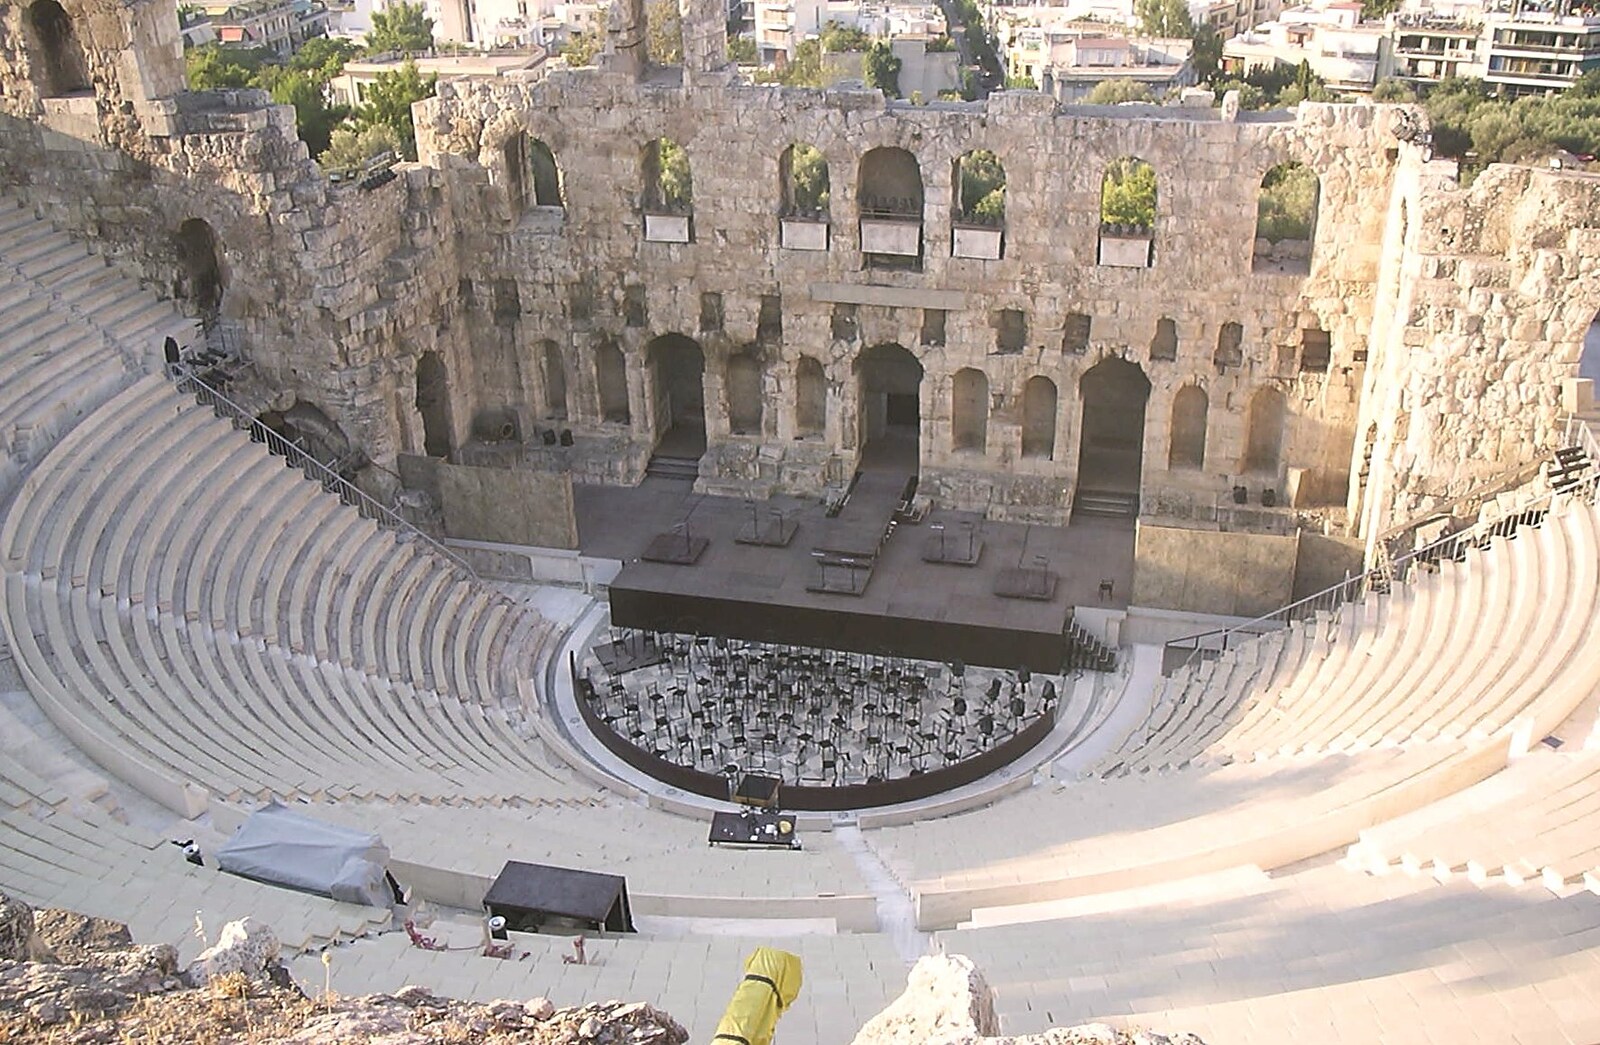 A Postcard From Athens: A Day Trip to the Olympics, Greece - 19th August 2004: The Theatre of Herod Atticus